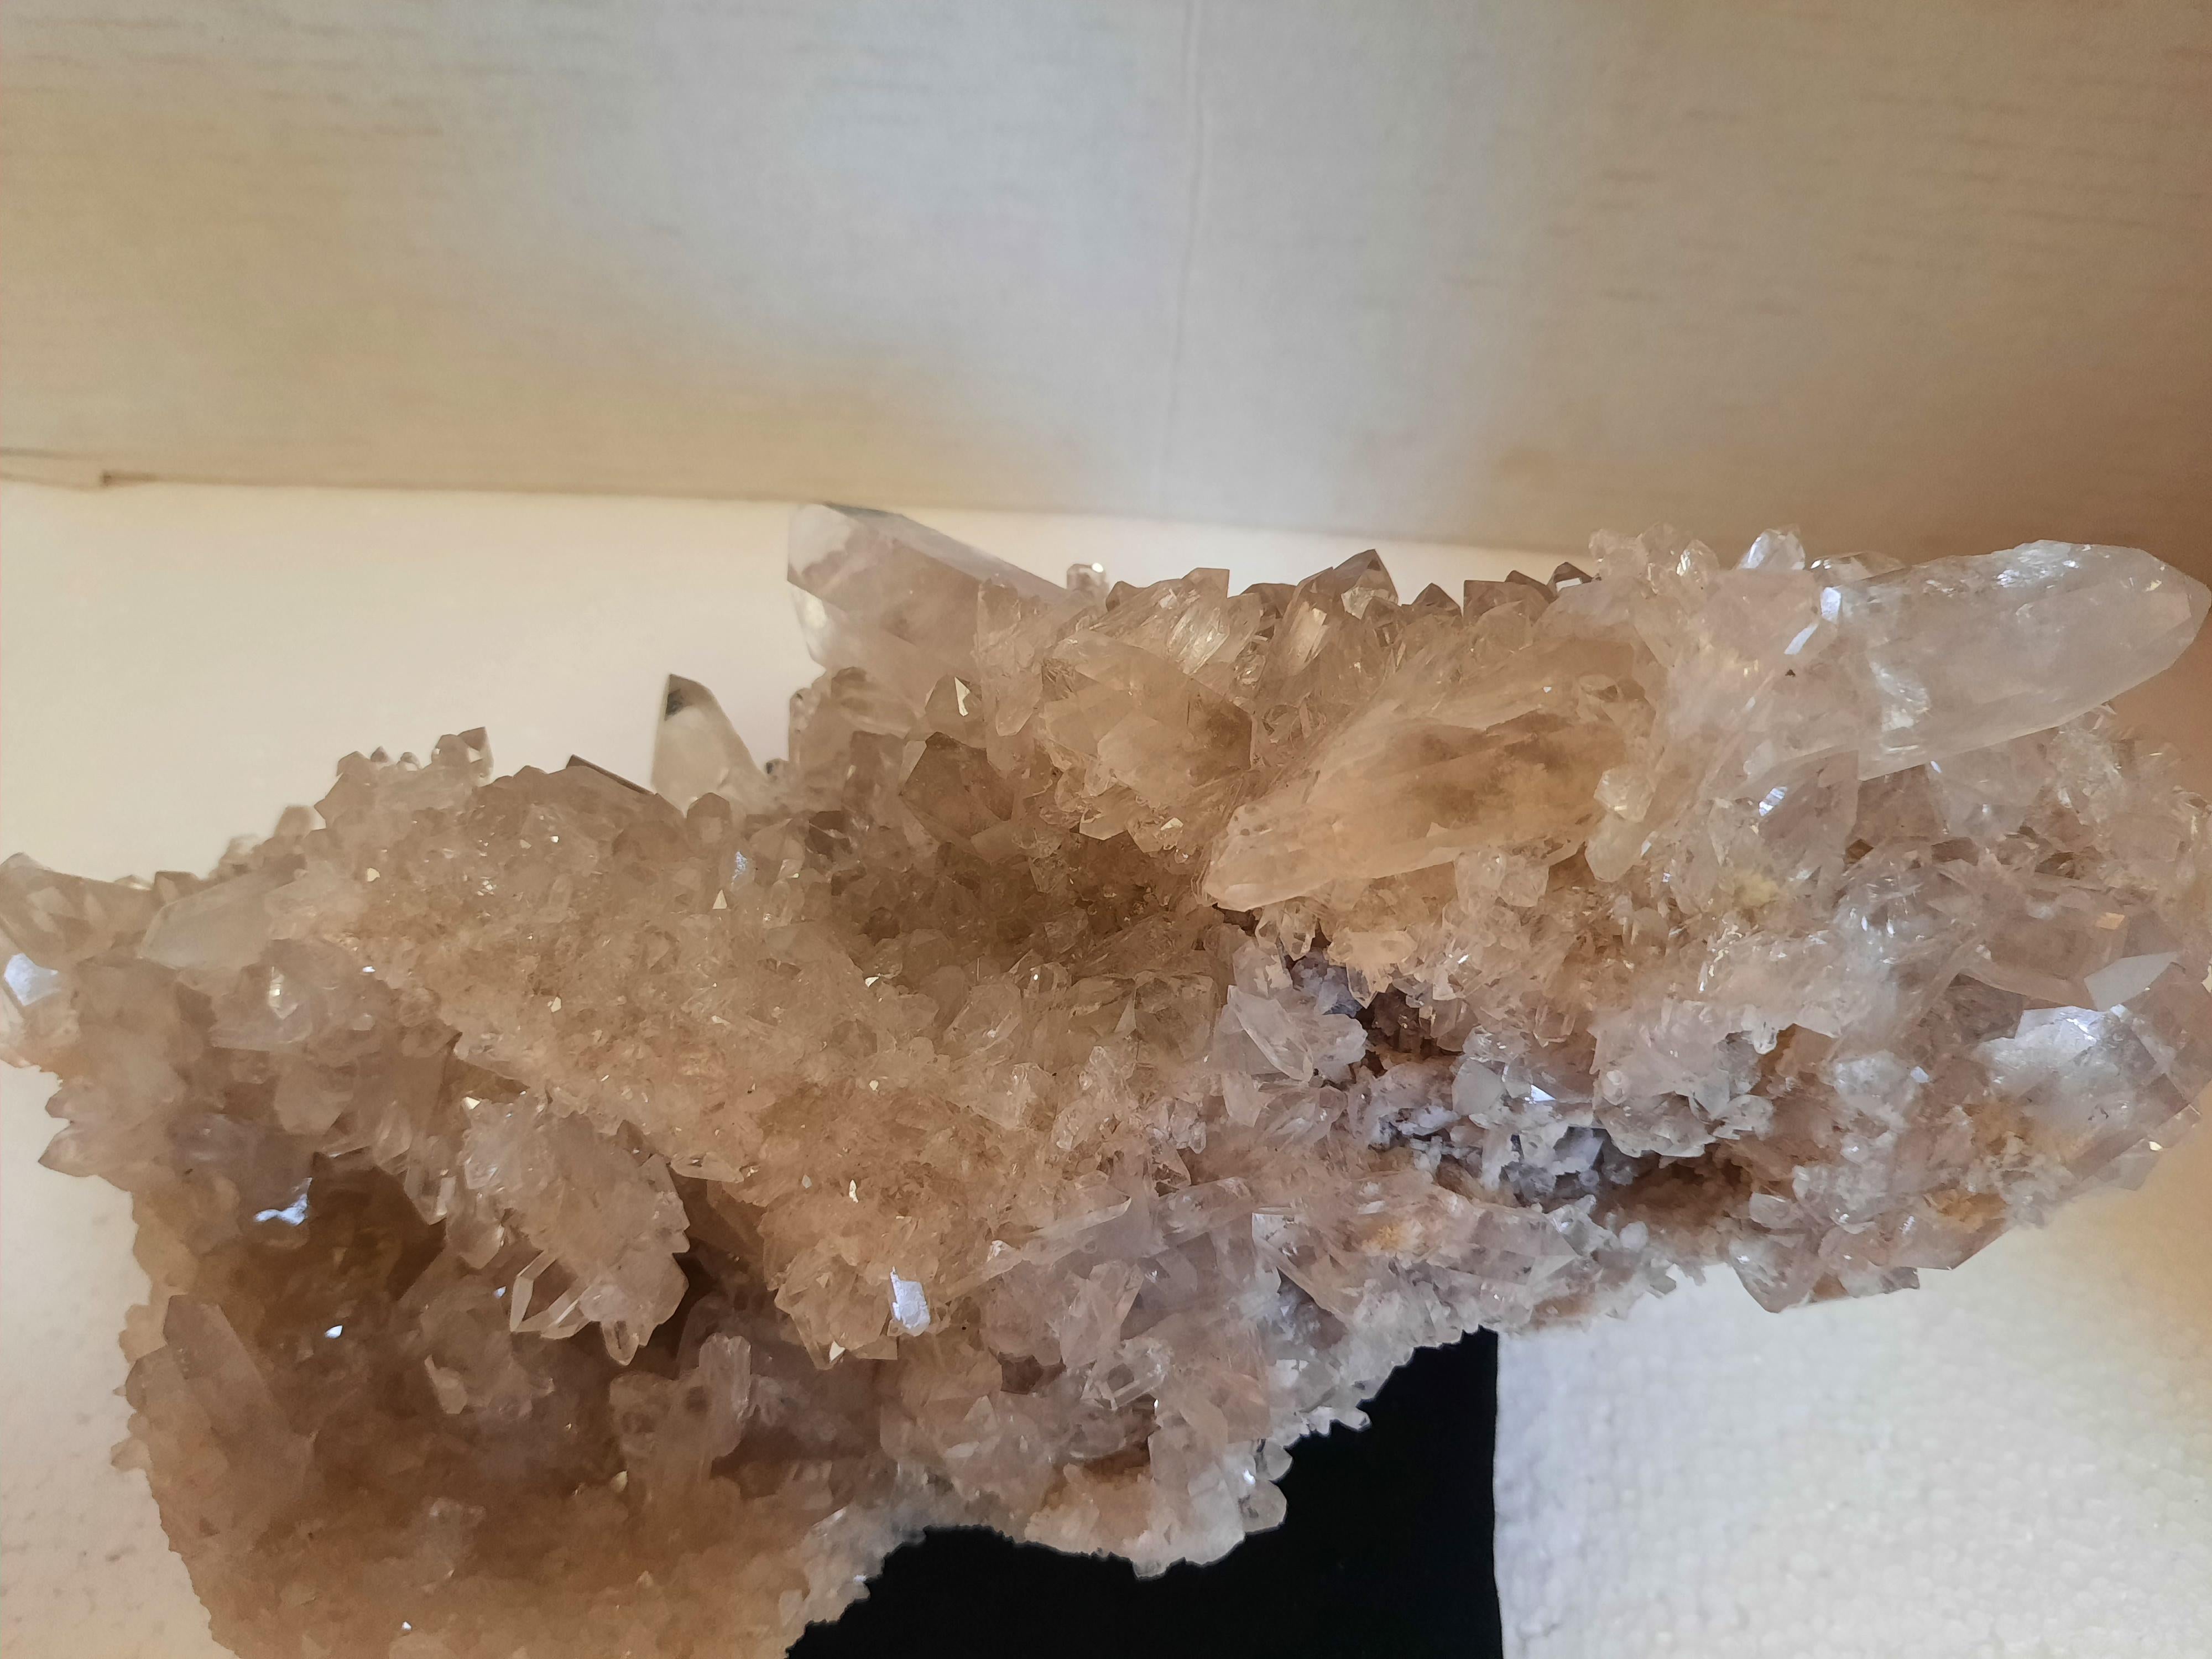 Beautiful natural quartz crystal specimen from Brazil. See photos for the details of the natural crystal formations that cover every side. This one-of-a-kind piece can accent a bookcase or even be used as a centerpiece to make a natural statement.